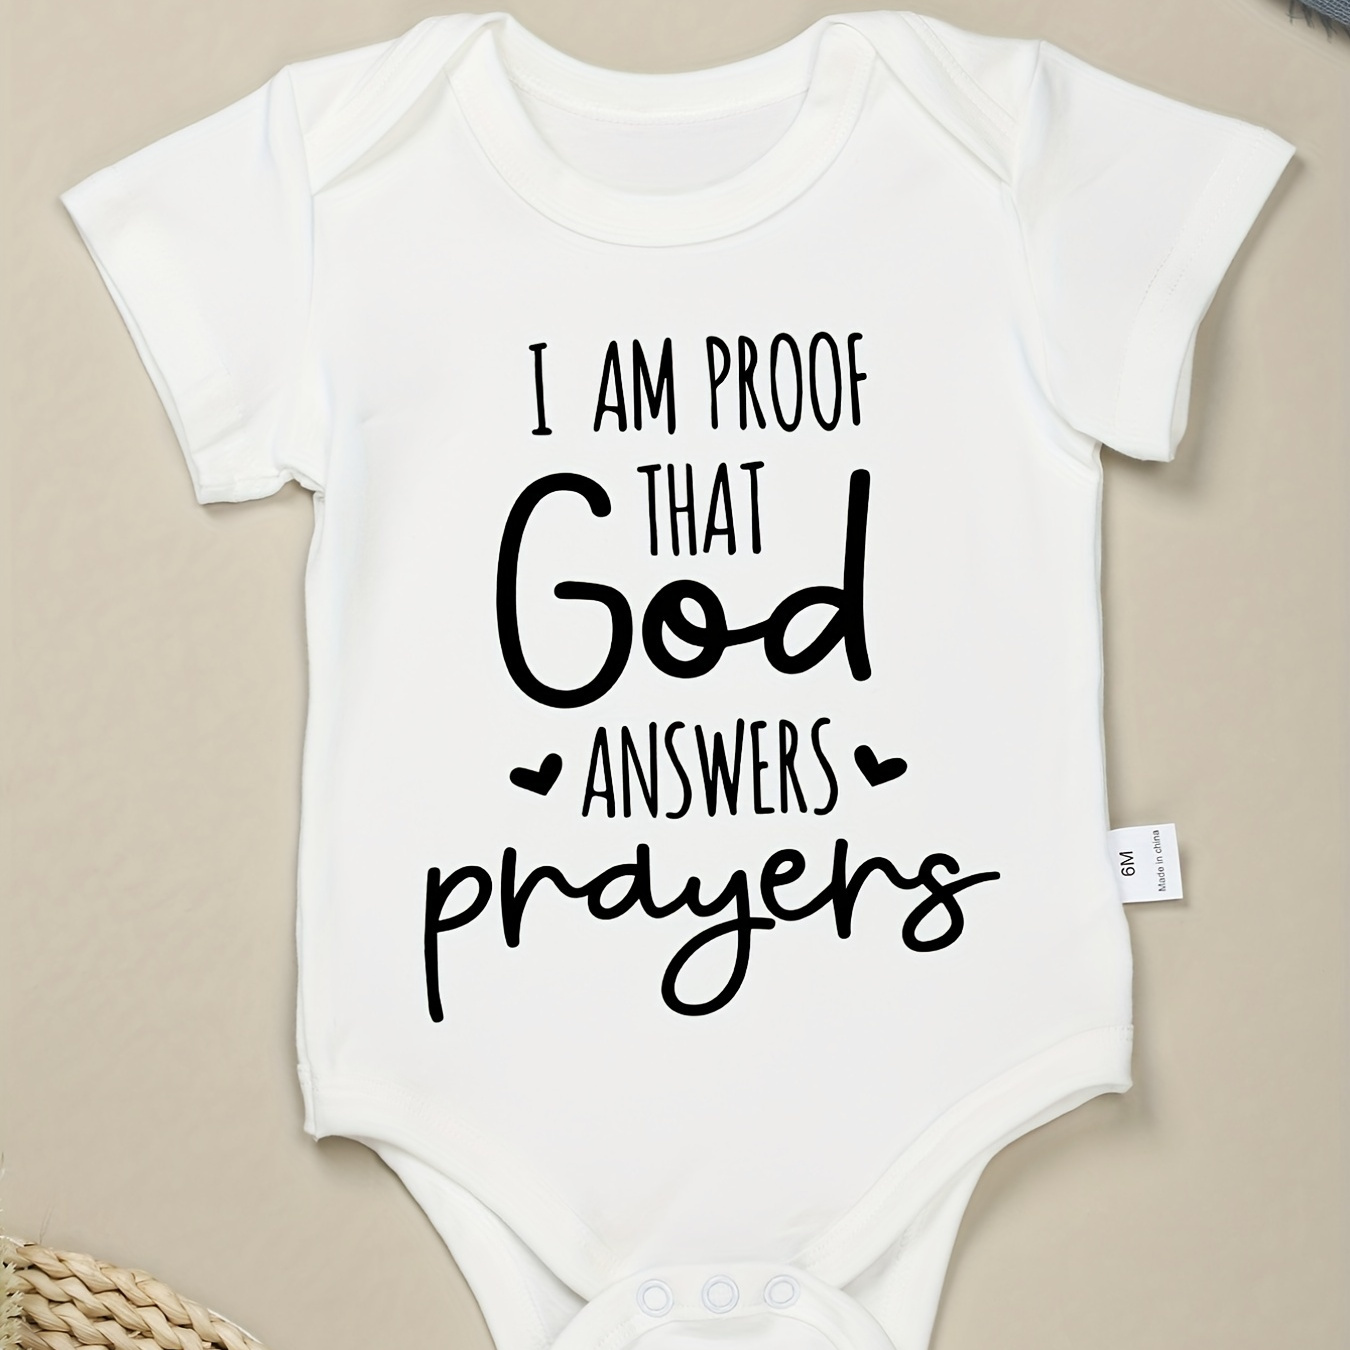 

100% Cotton Baby Bodysuits I Am Proof That God Answers Prayers Letter Printing Comfortable Soft Crew Neck